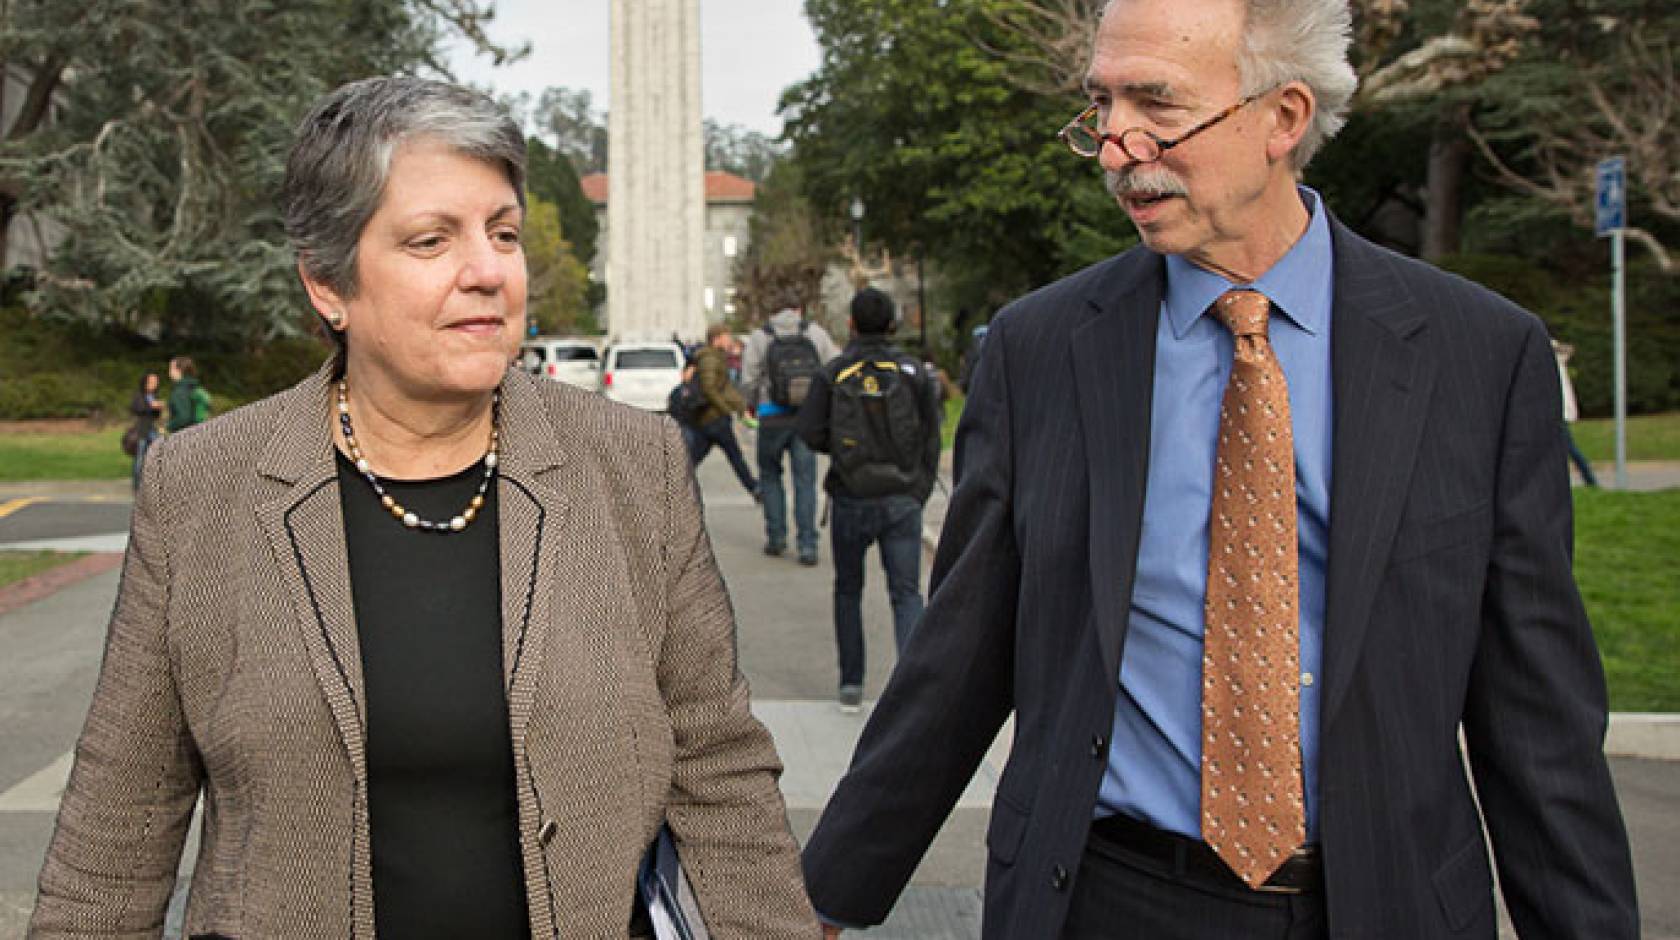 President Janet Napolitano and Photo of UC Berkeley Chancellor Nicholas Dirks on the Berkeley campus